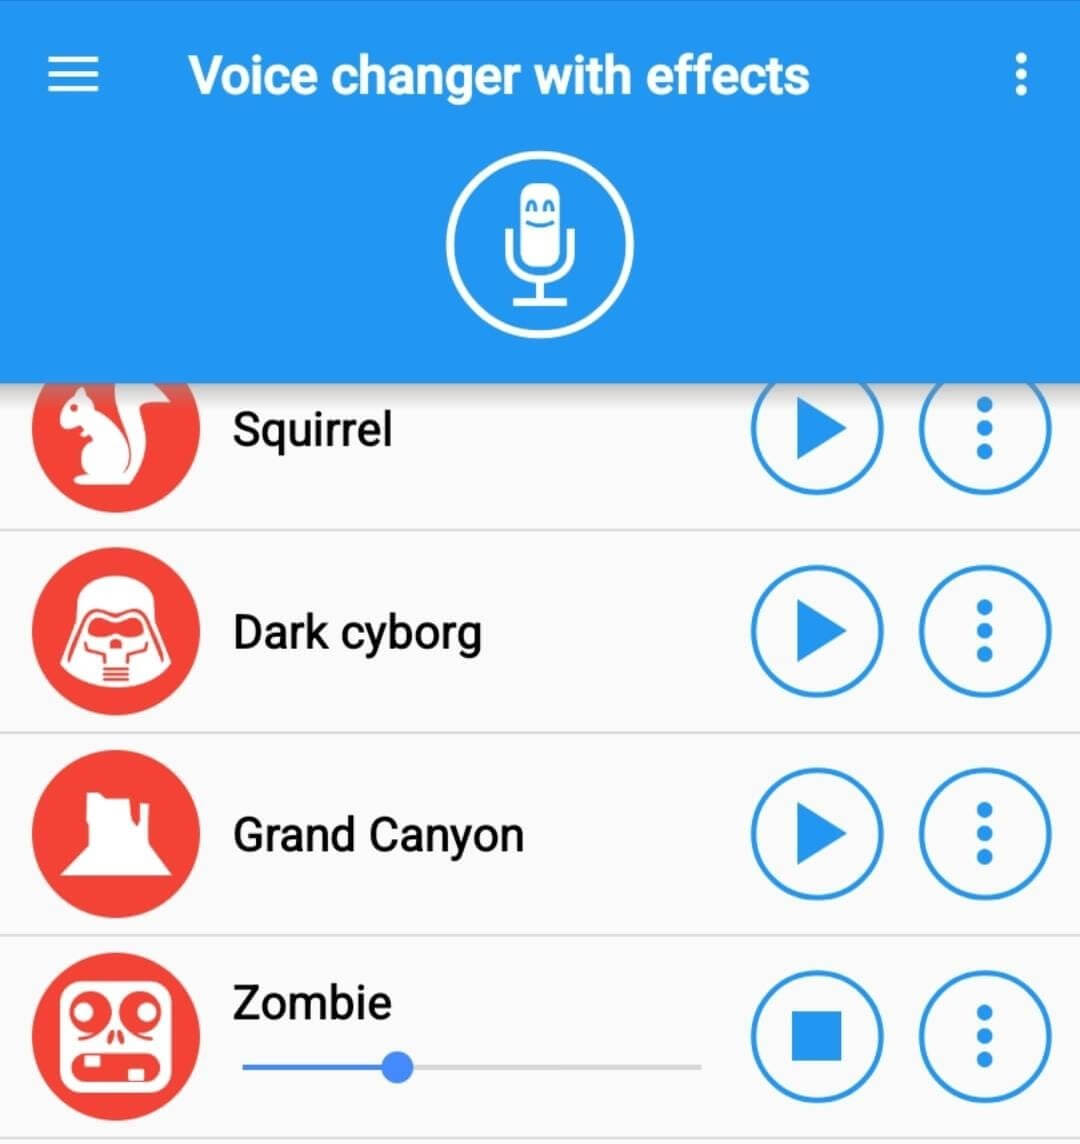 zombie voice from voice changer with effects